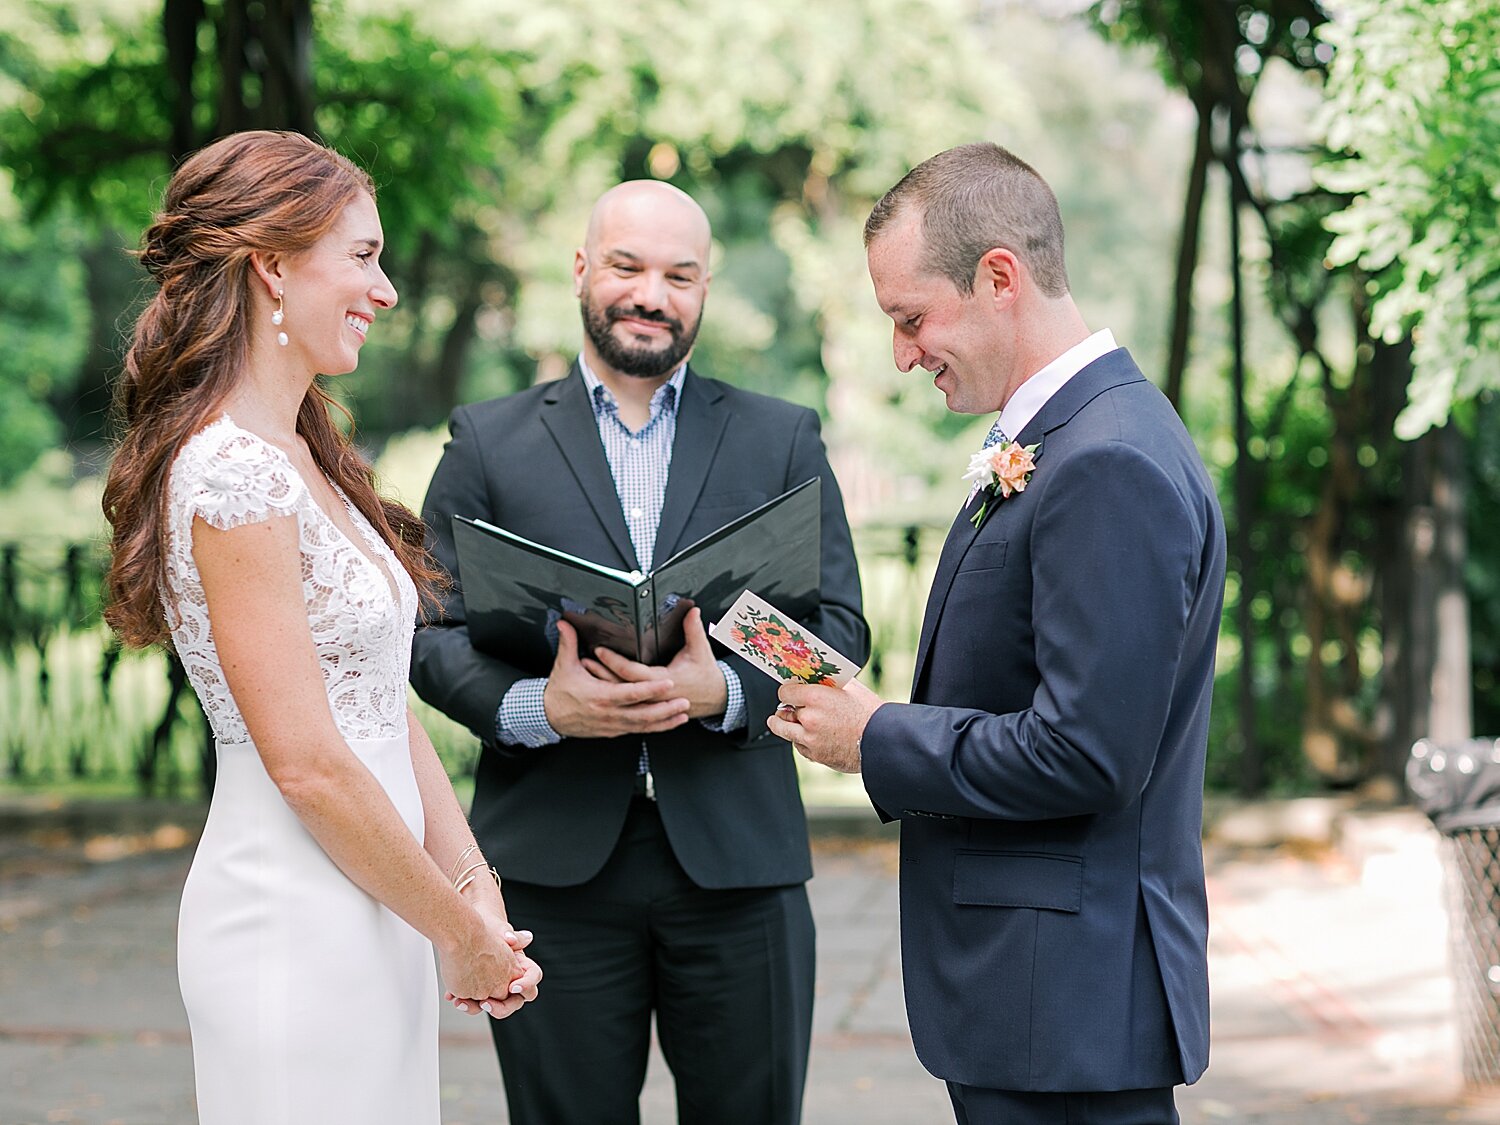 groom reads vows to bride during city elopement | Asher Gardner Photography | Elopement at the Central Park Conservatory Gardens